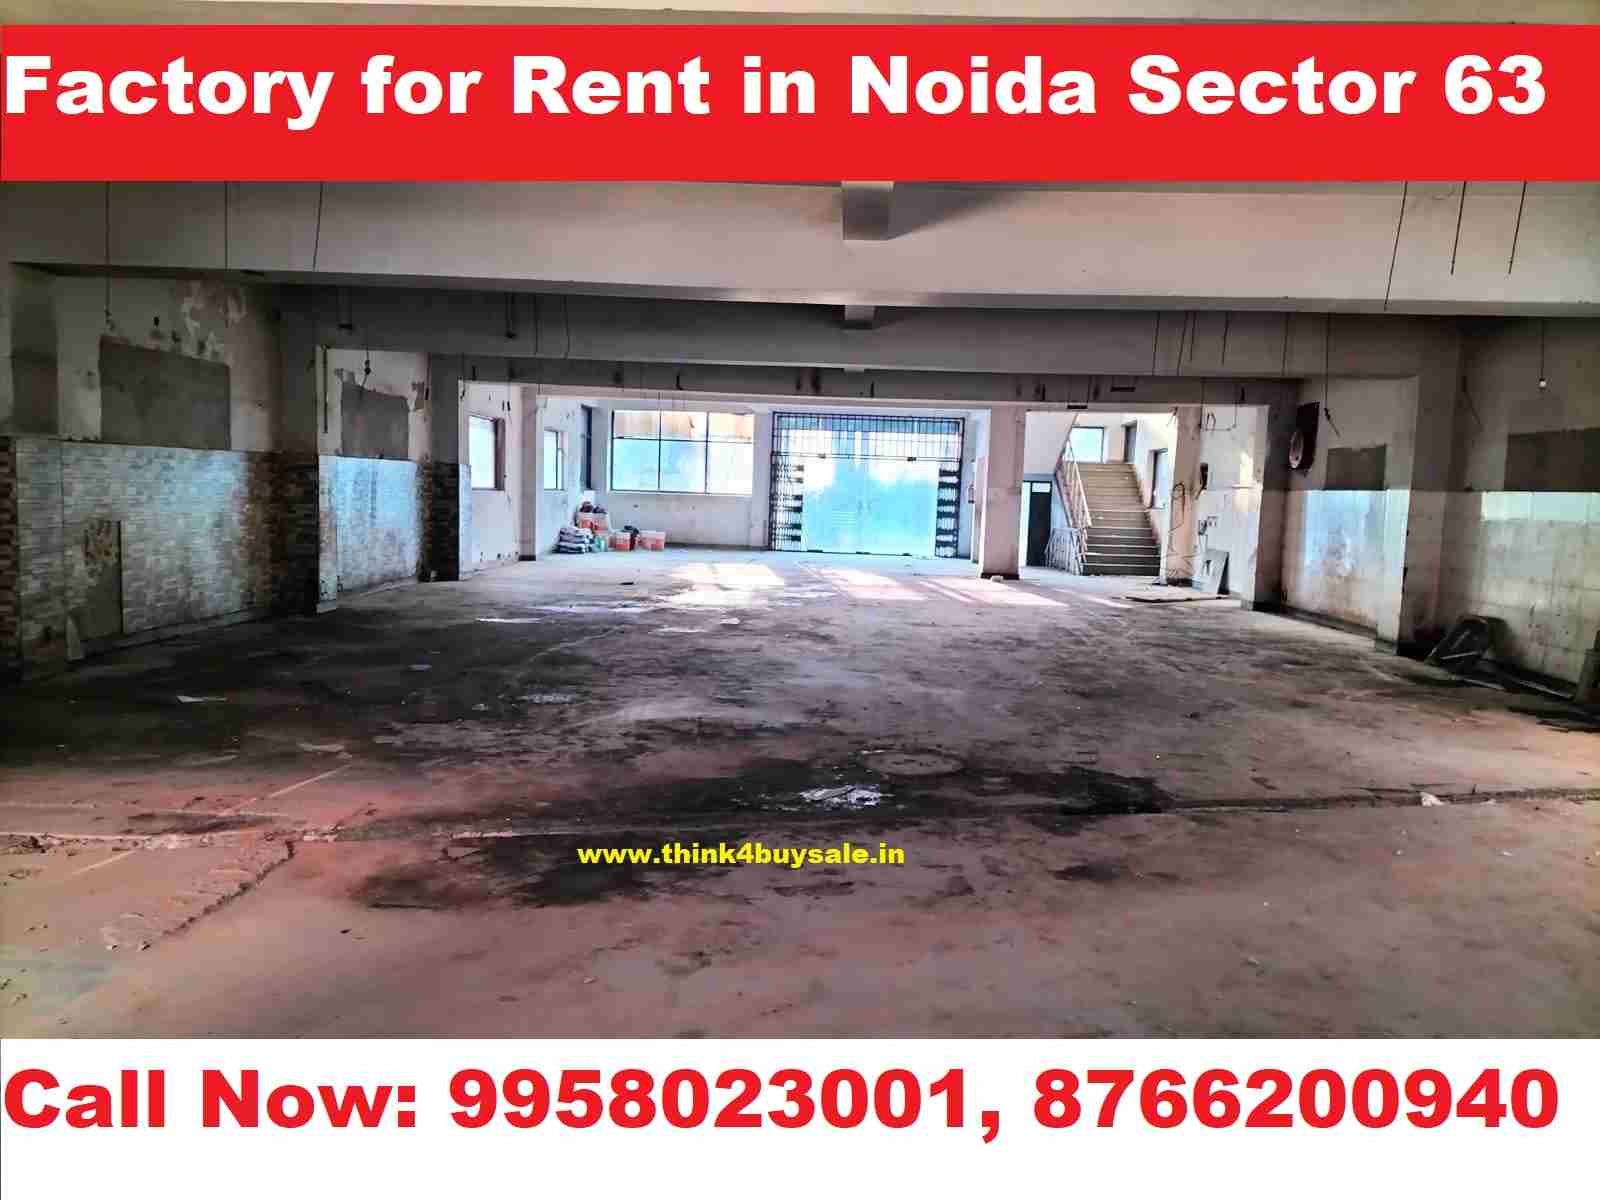 Factory for Rent in Noida Sector 63